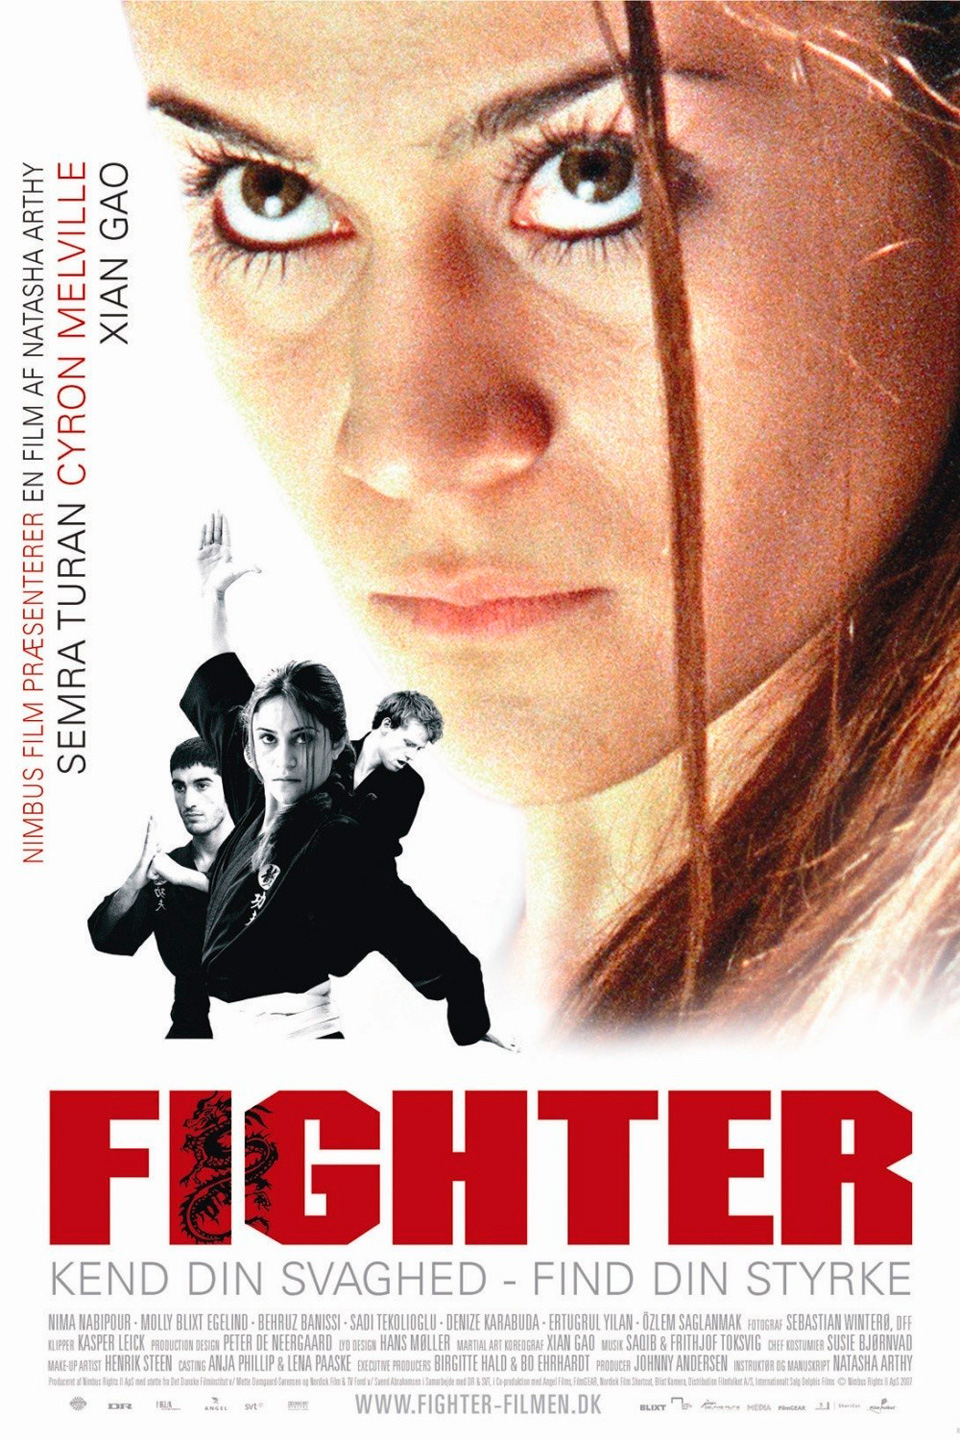 kung fu fighter (2007)